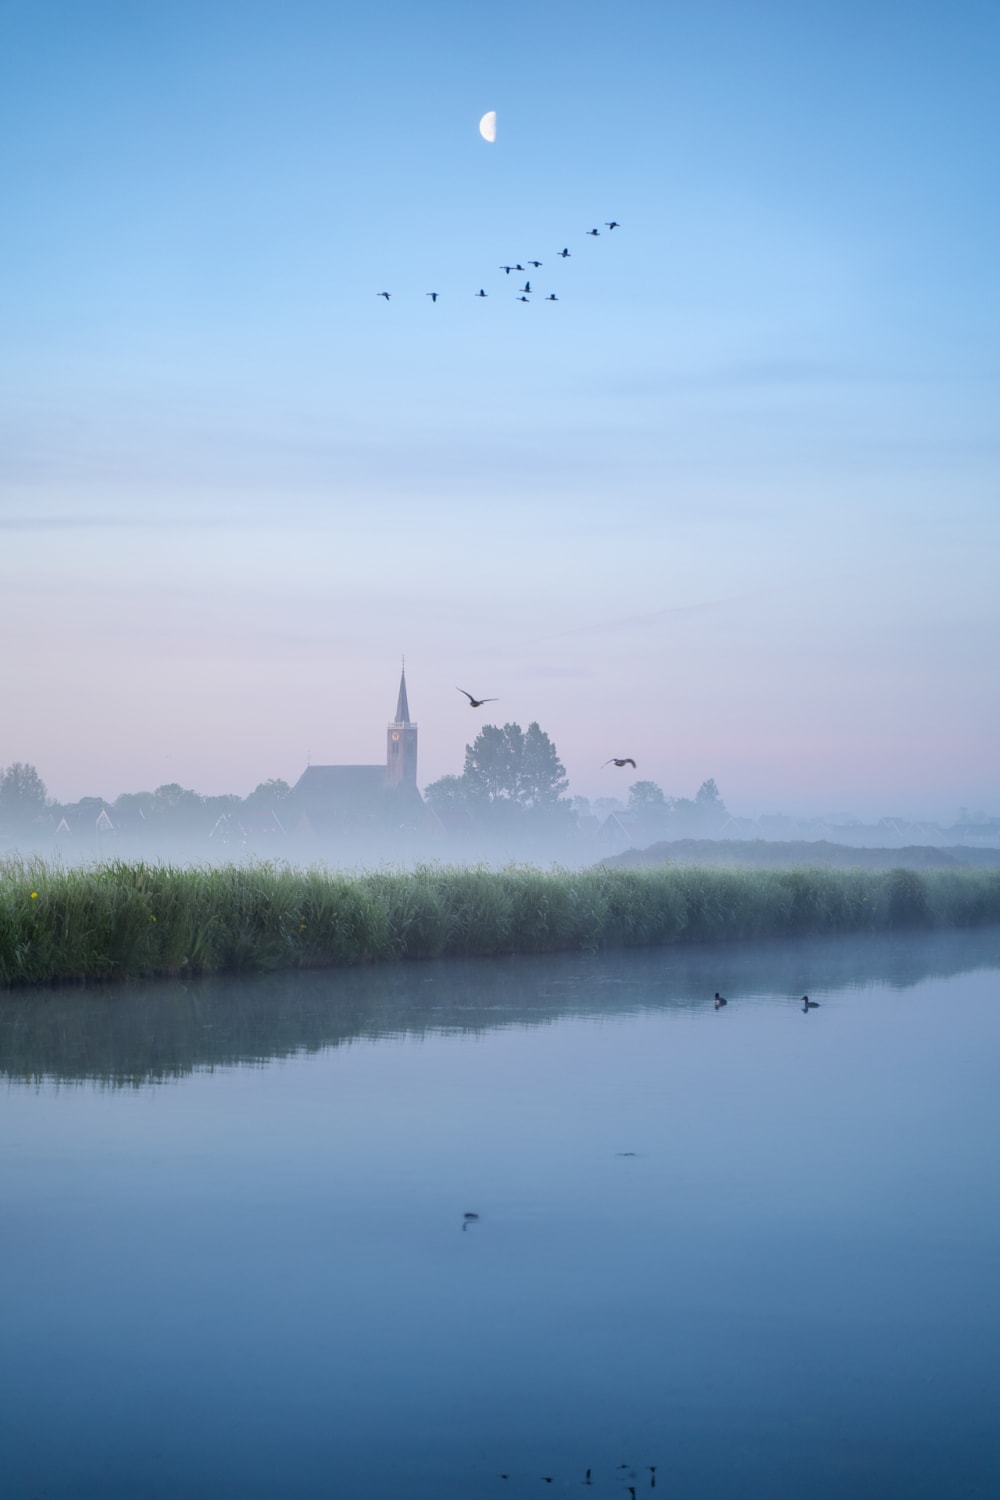 A calm spring morning in the Netherlands